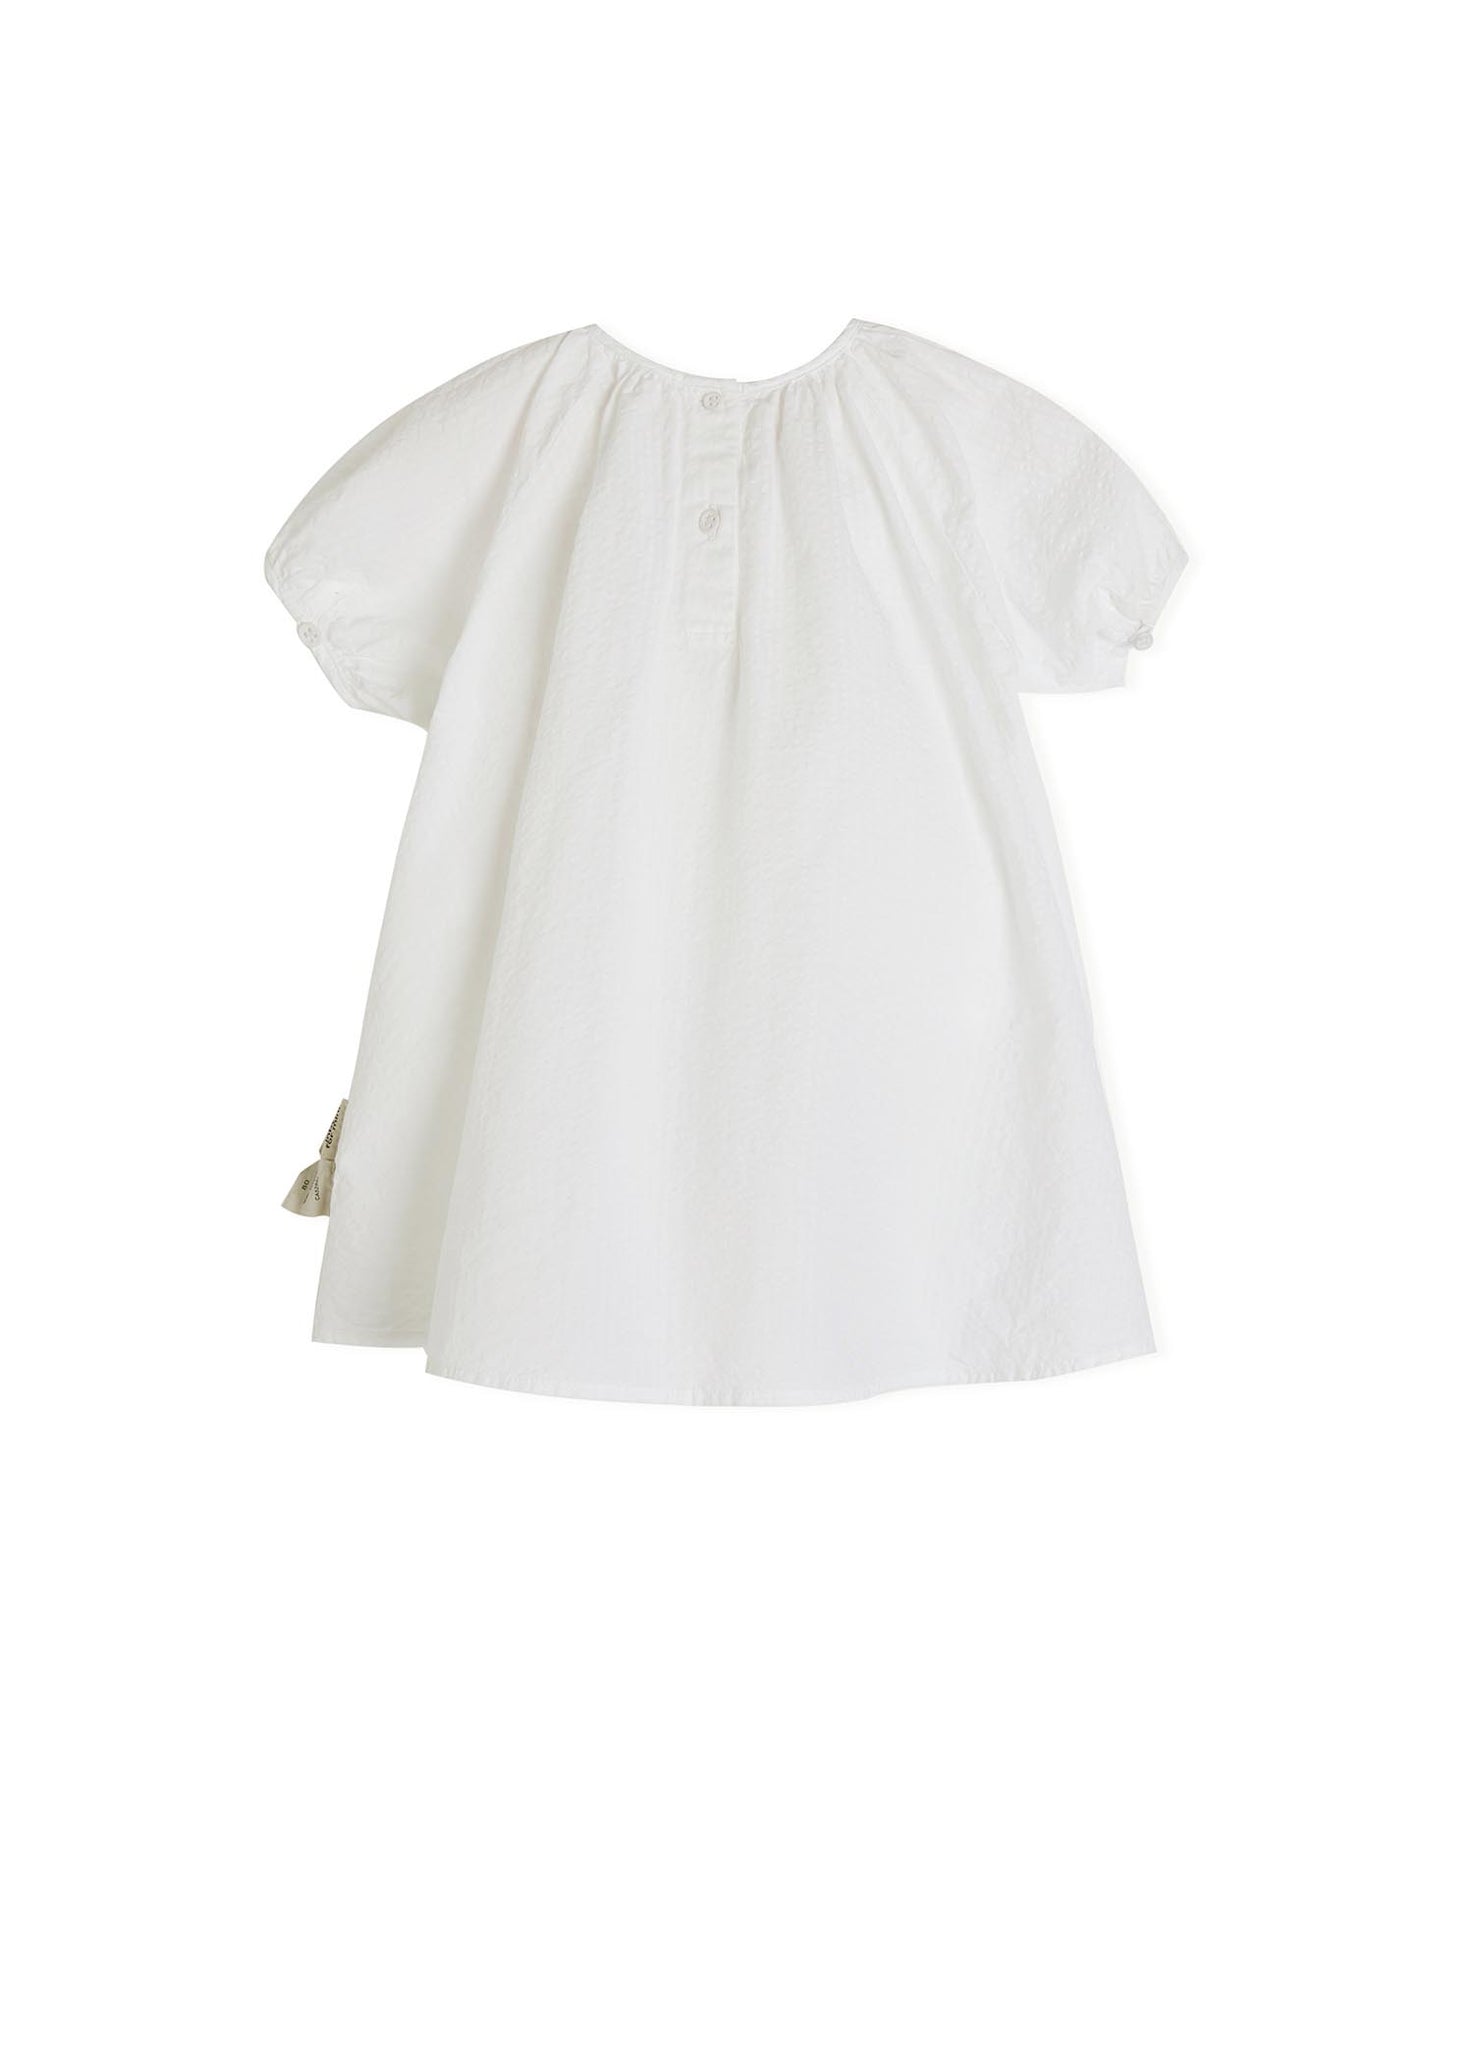 Dresses / jnby for mini Solid Short Sleeve Dress (100% Cotton)